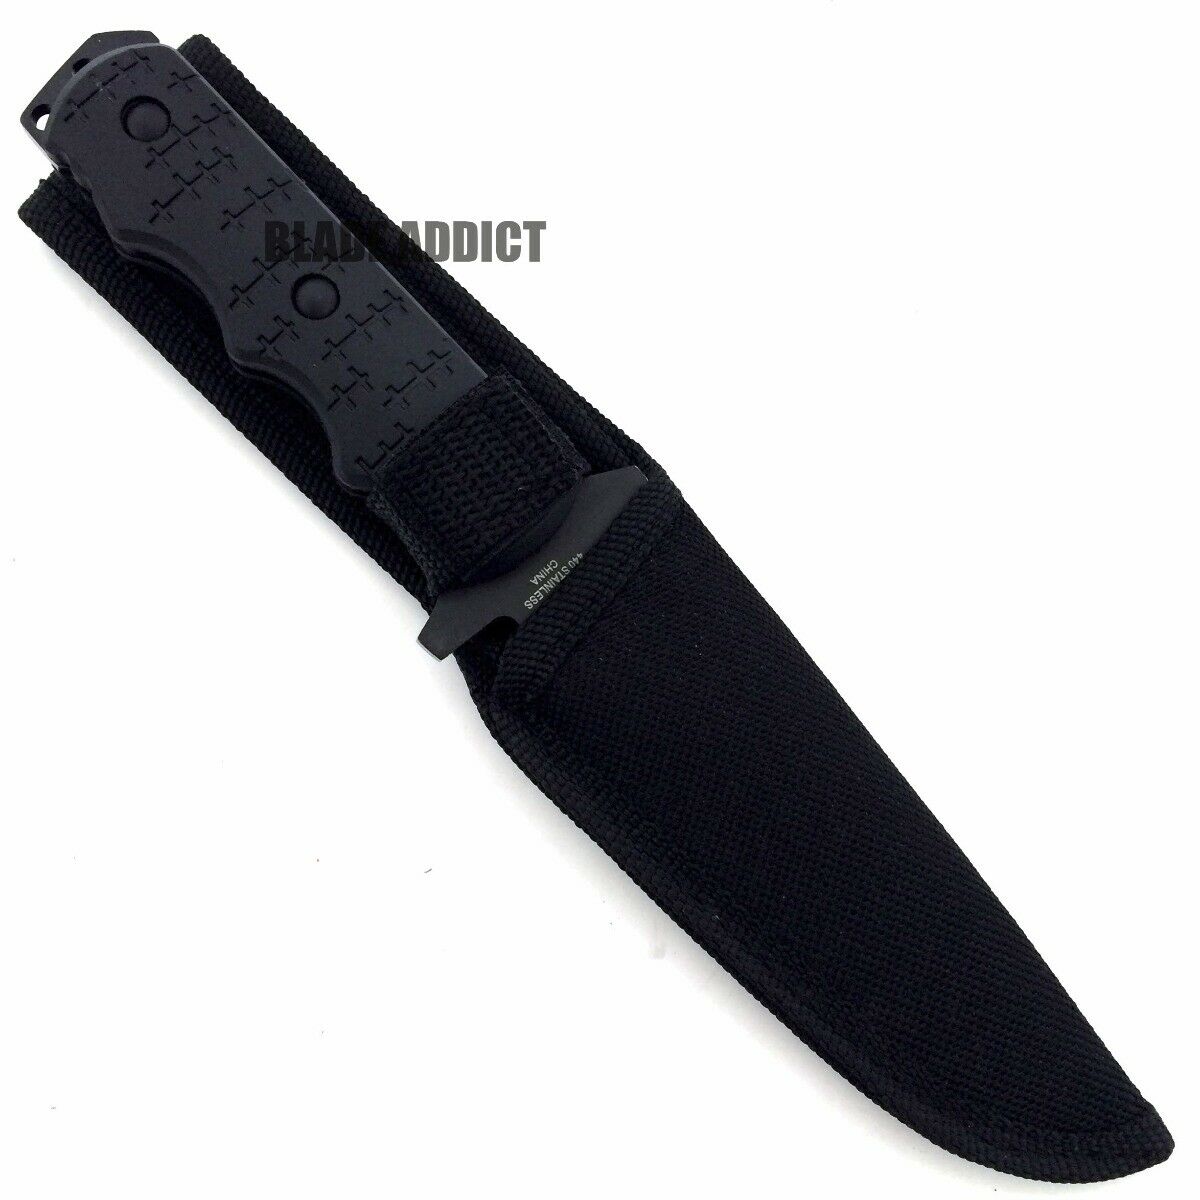 9" Full Tang Tactical Hunting Survival Knife w/ Sheath Military Bowie Combat